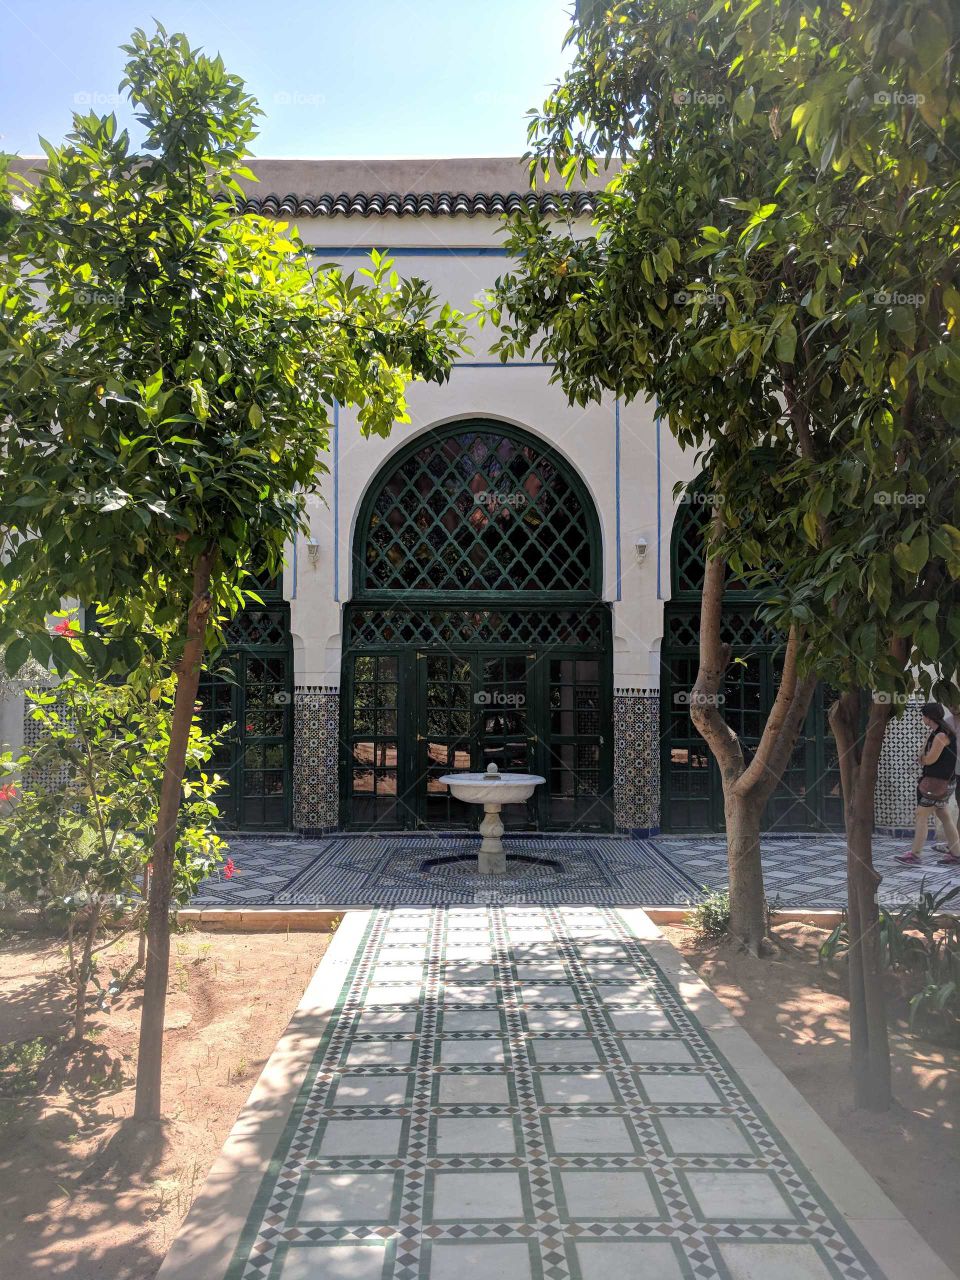 Walking and Strolling Through the Ceramic Tile Mosaic Floors (Pathways) and Stained Glass Windows (and Doors) of the Garden at the Bahia Palace in Marrakech in Morocco